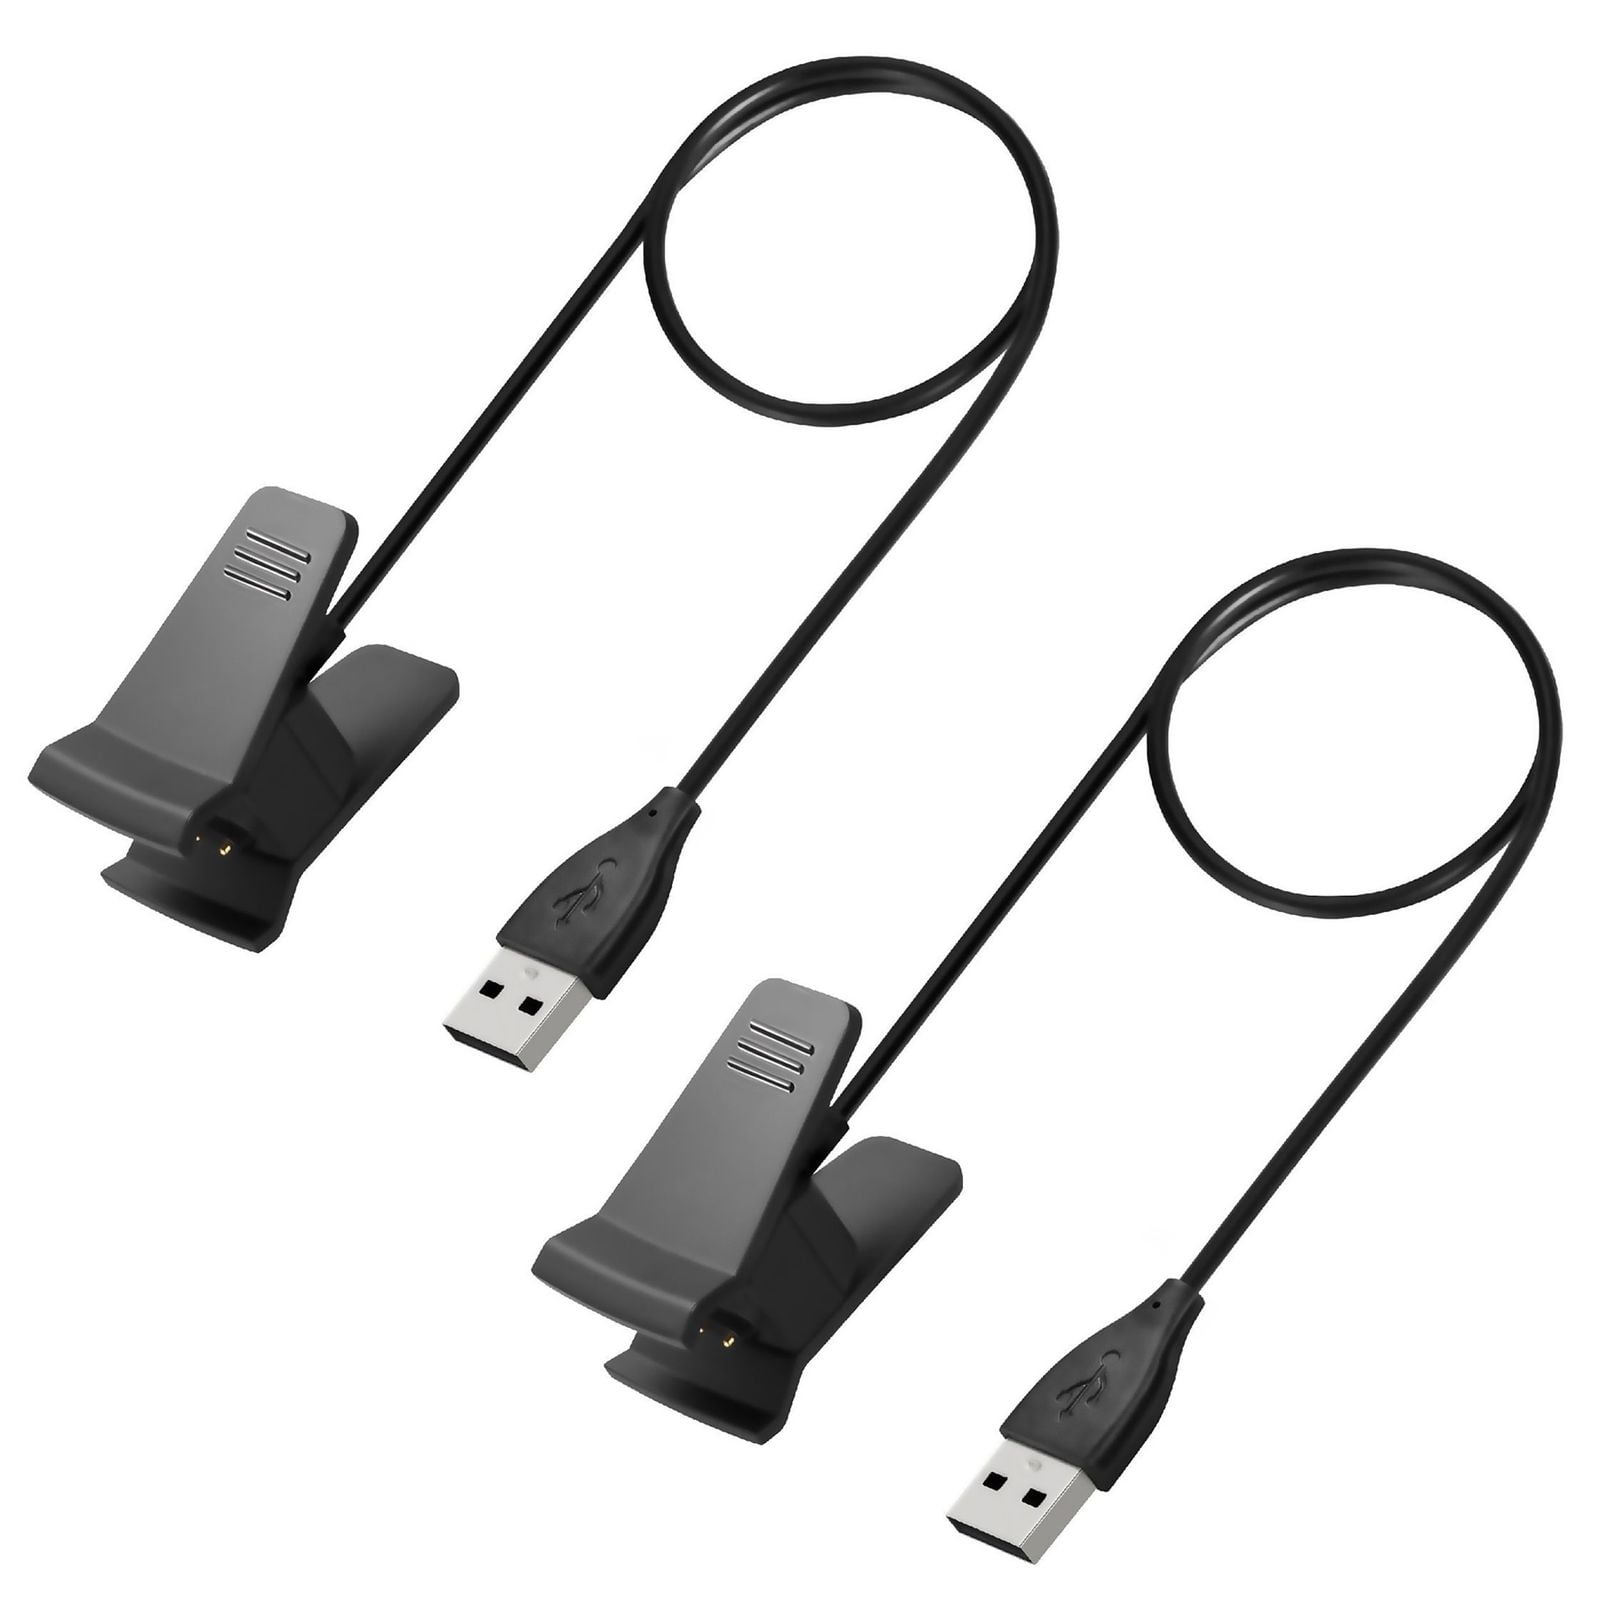 Not for Alta HR 1-Pack 1FT/30CM Replacement USB Charging Cable Cradle Dock for Fitbit Alta and Fitbit Ace Fitness Wristband Compatible for Fitbit Alta Charger 